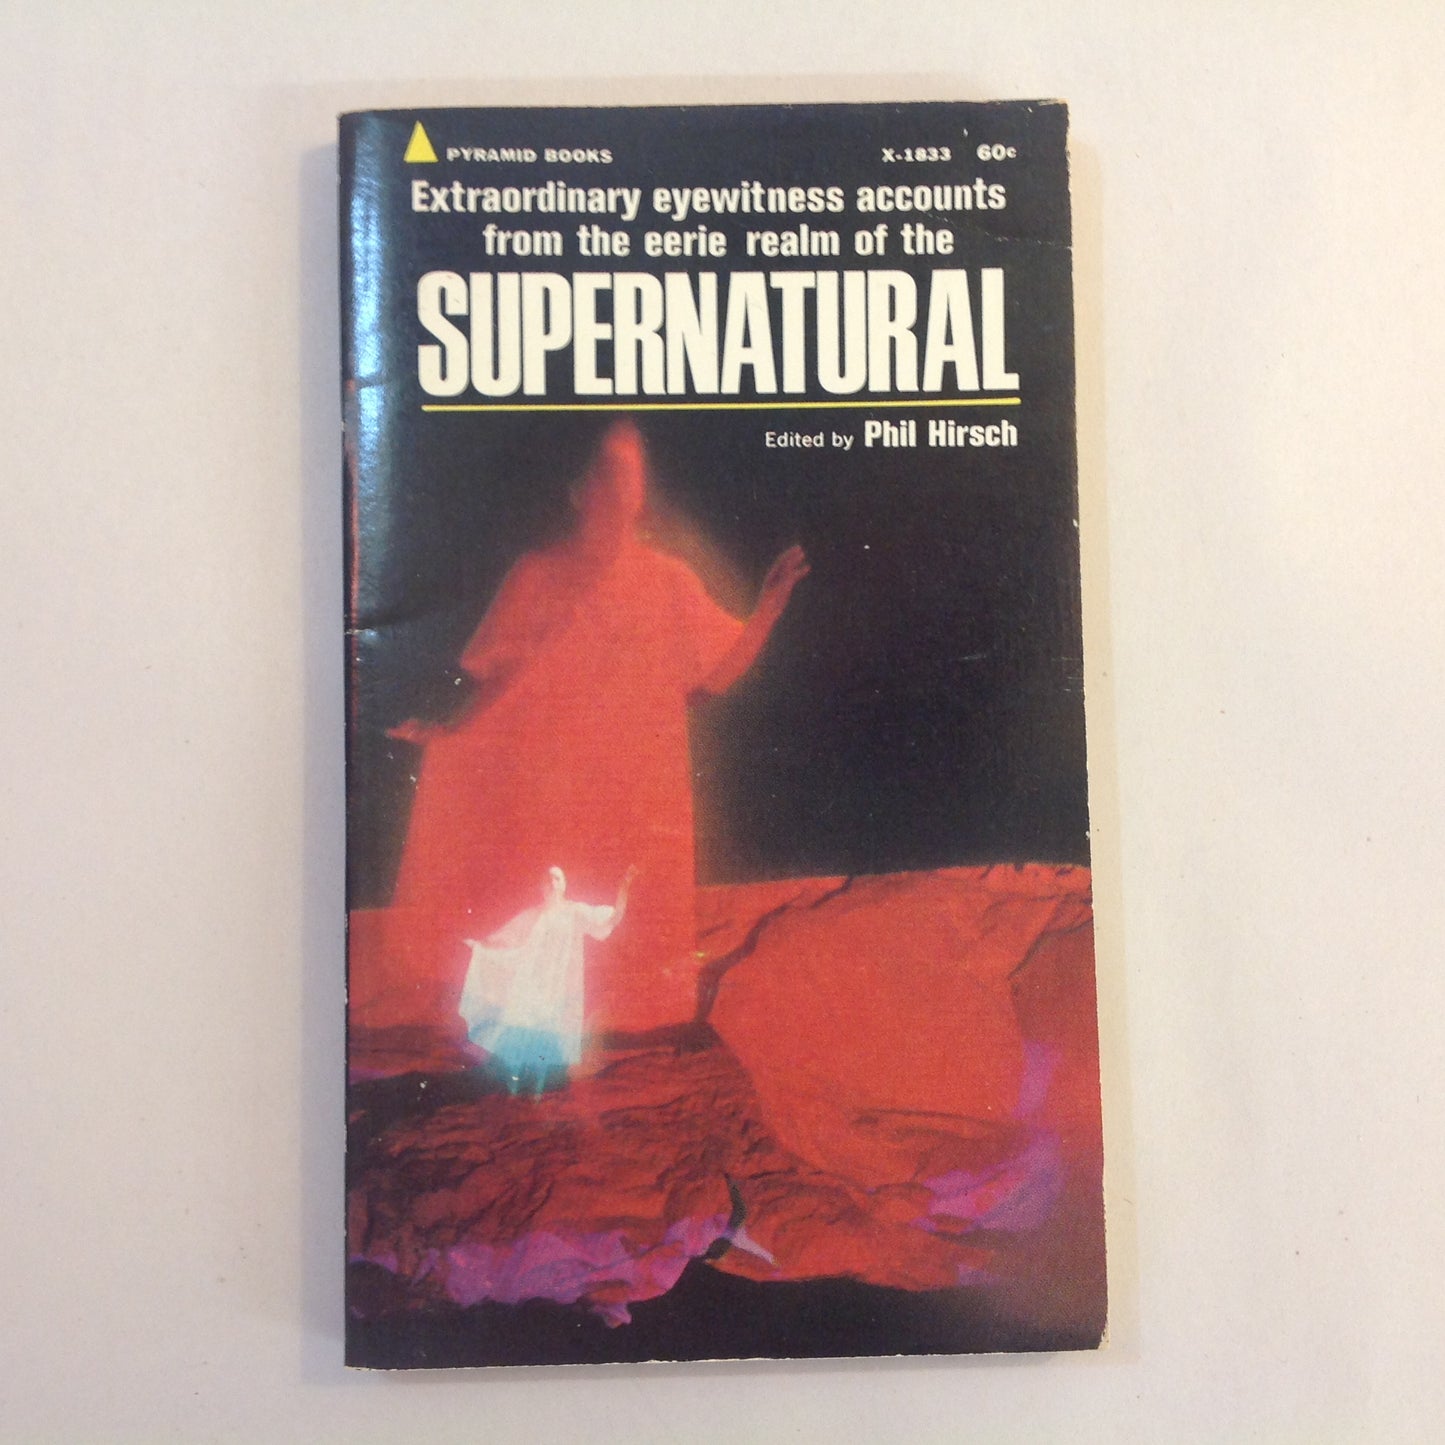 Vintage 1968 Mass Market Paperback SUPERNATURAL: Extraordinary Eyewitness Accounts From the Eerie Realm Phil Hirsch, Ed First Edition